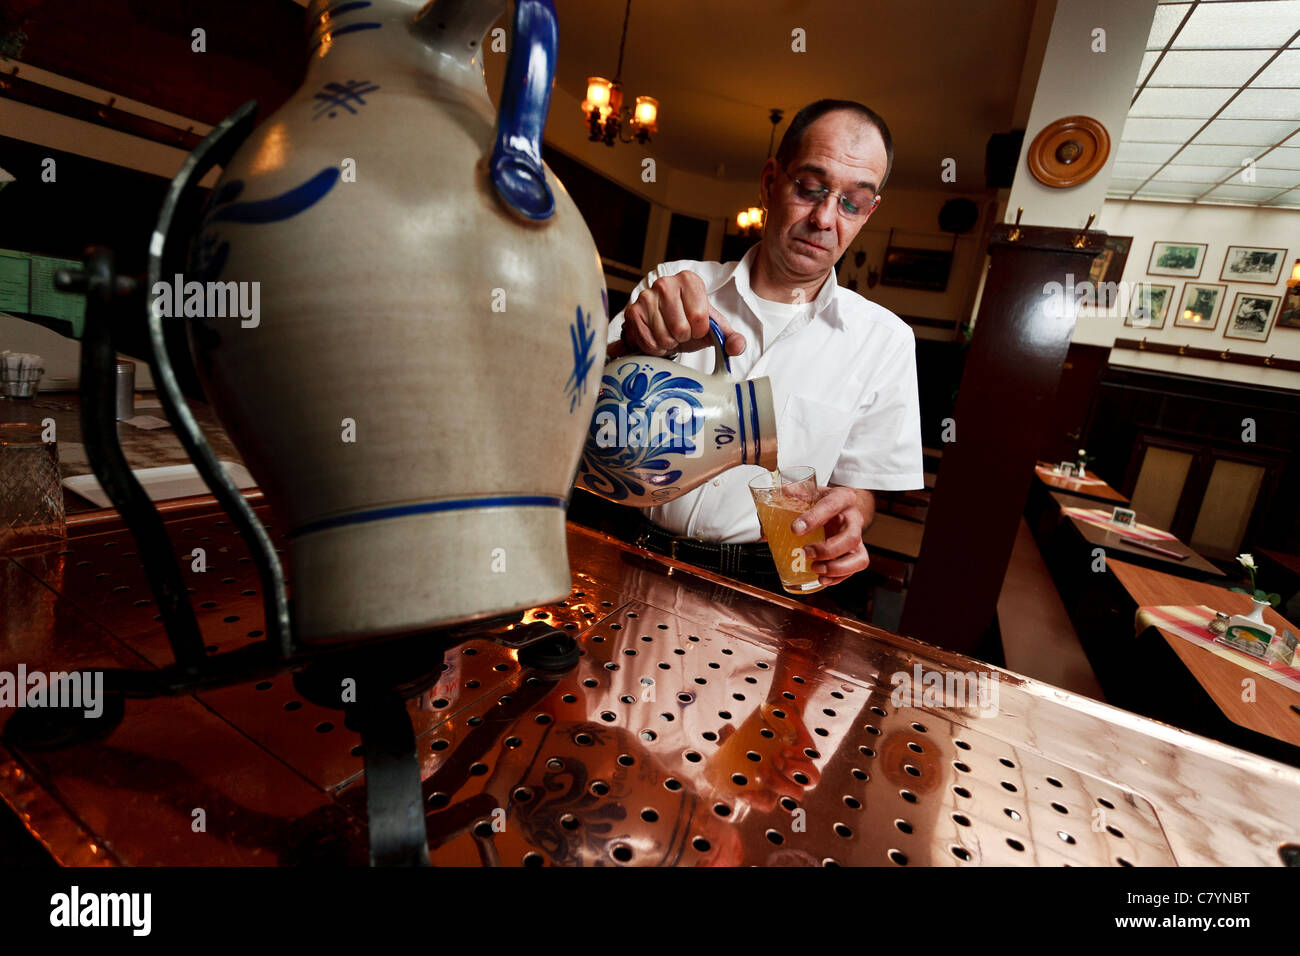 Barman serving a famous type of german cider called Apfelwein, a local speciality of Frankfurt. Stock Photo